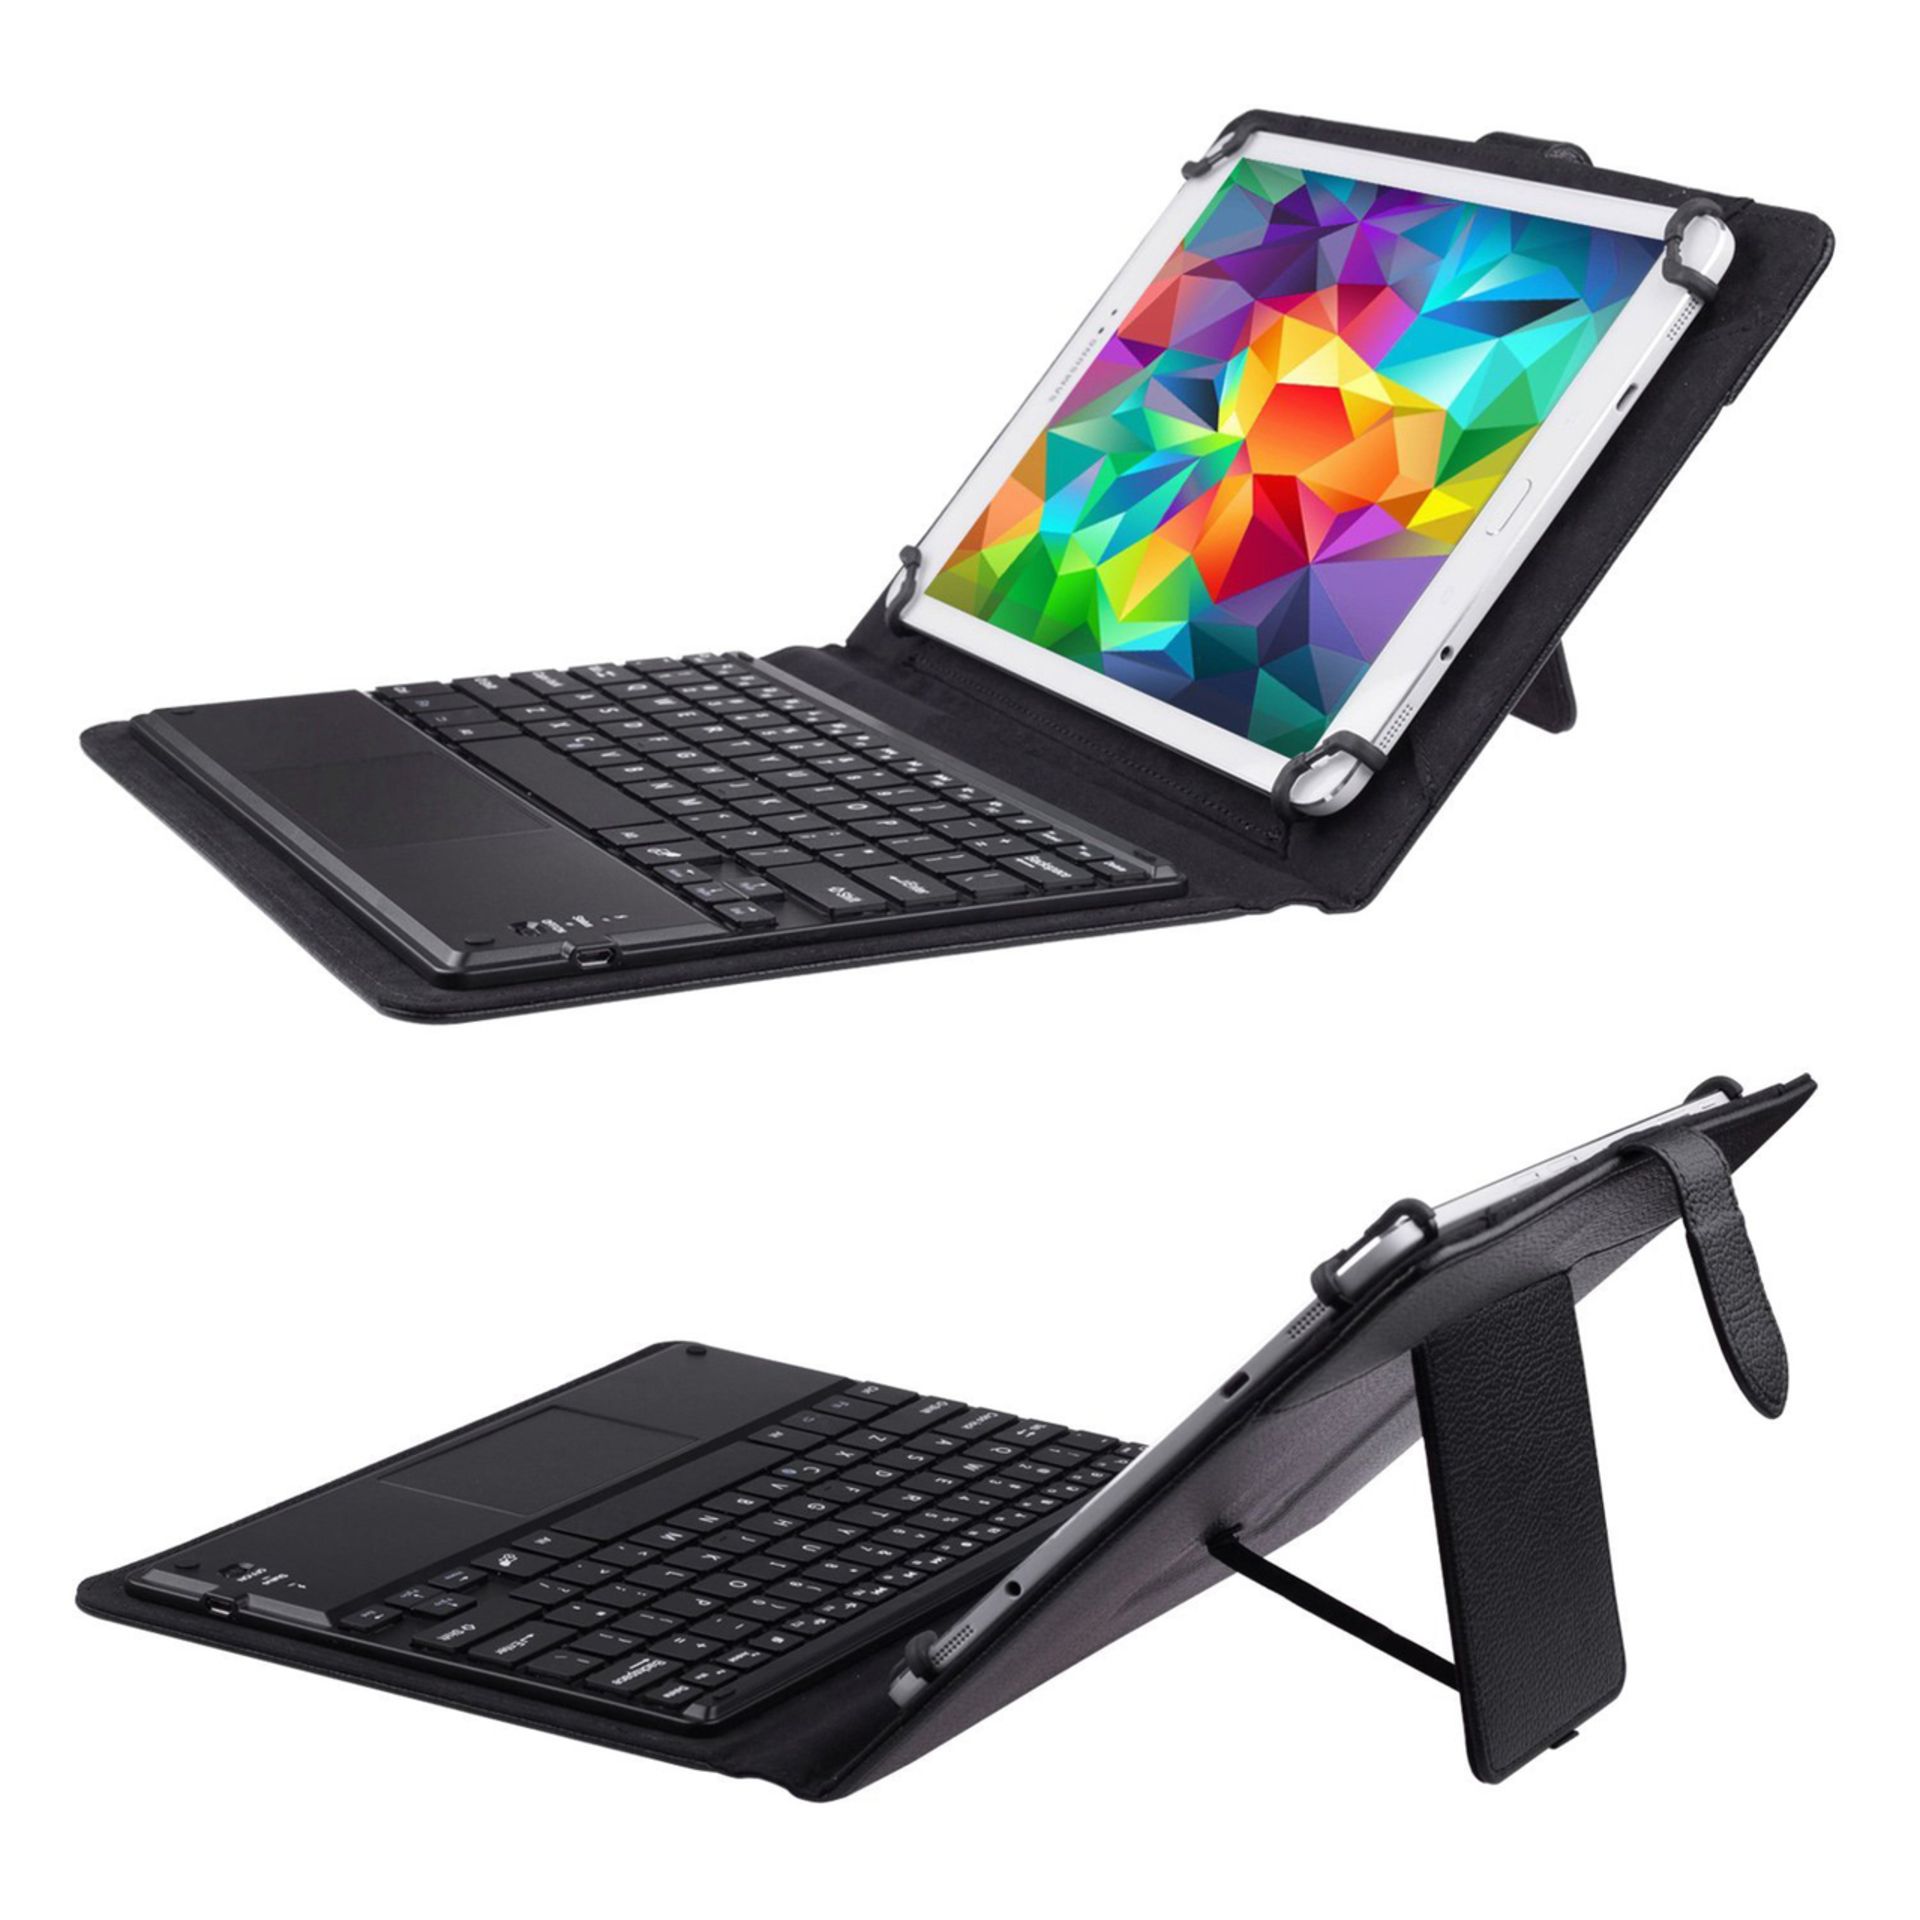 V Brand New Bluetooth Keyboard Case with Touchpad for a Samsung Tablet (Amazon Price £15.85)